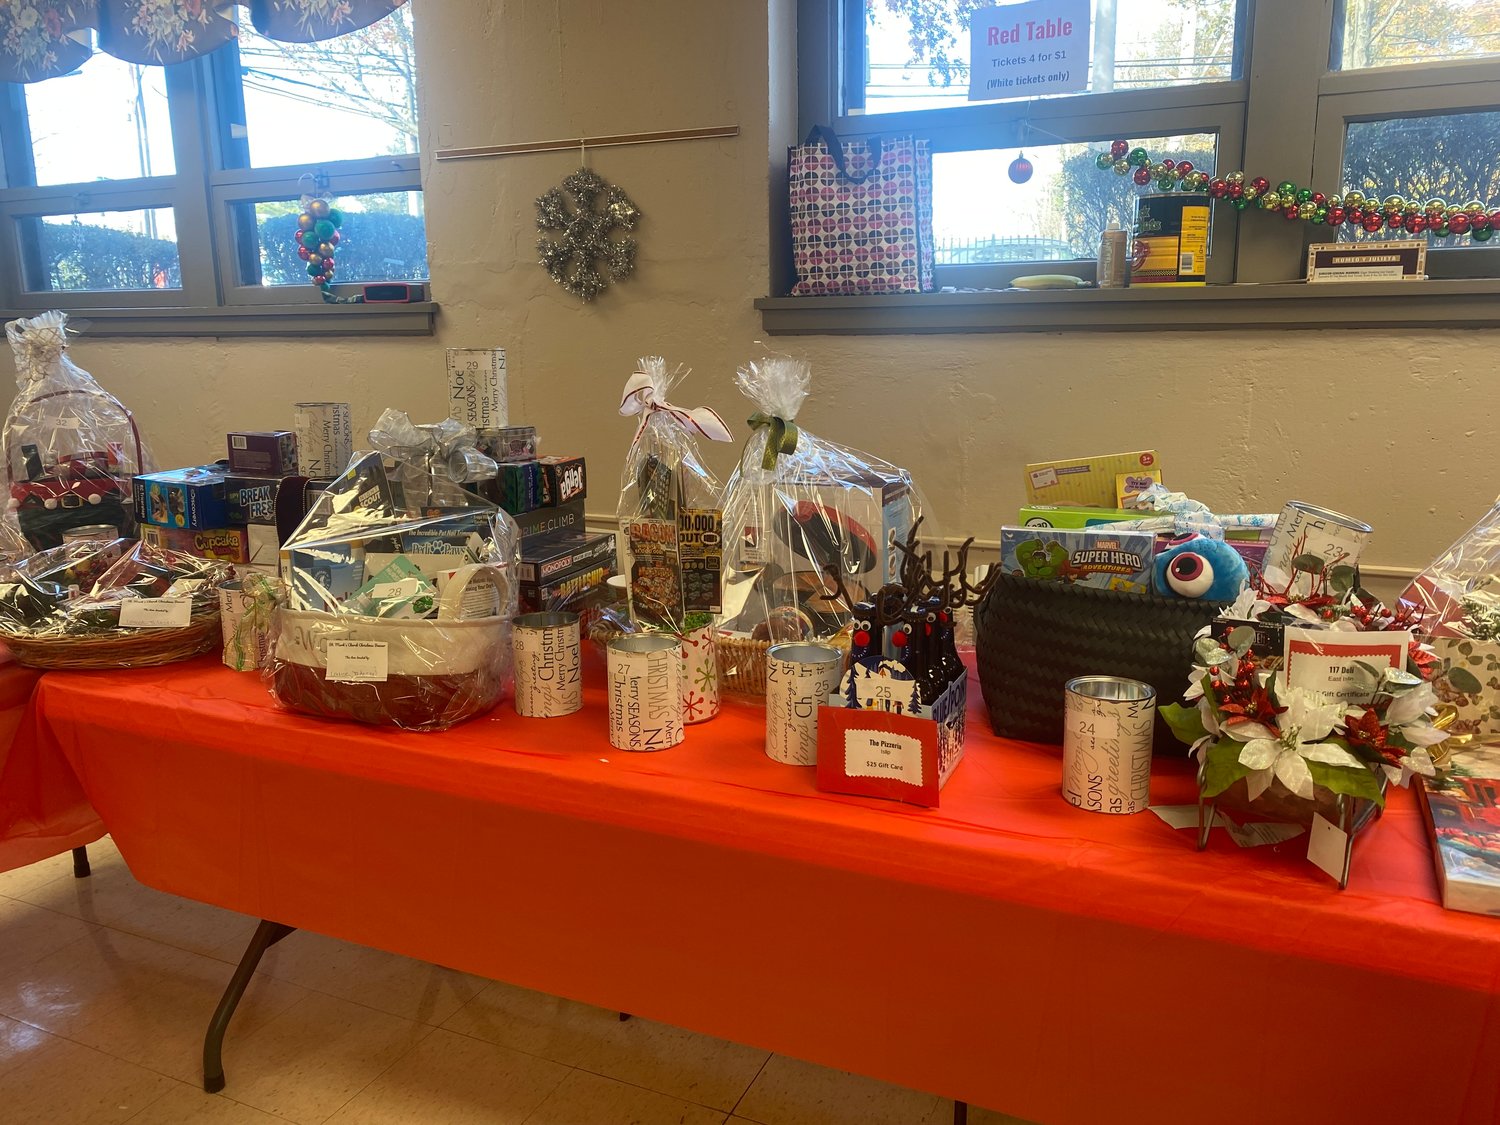 There was no shortage of great raffle baskets to win.